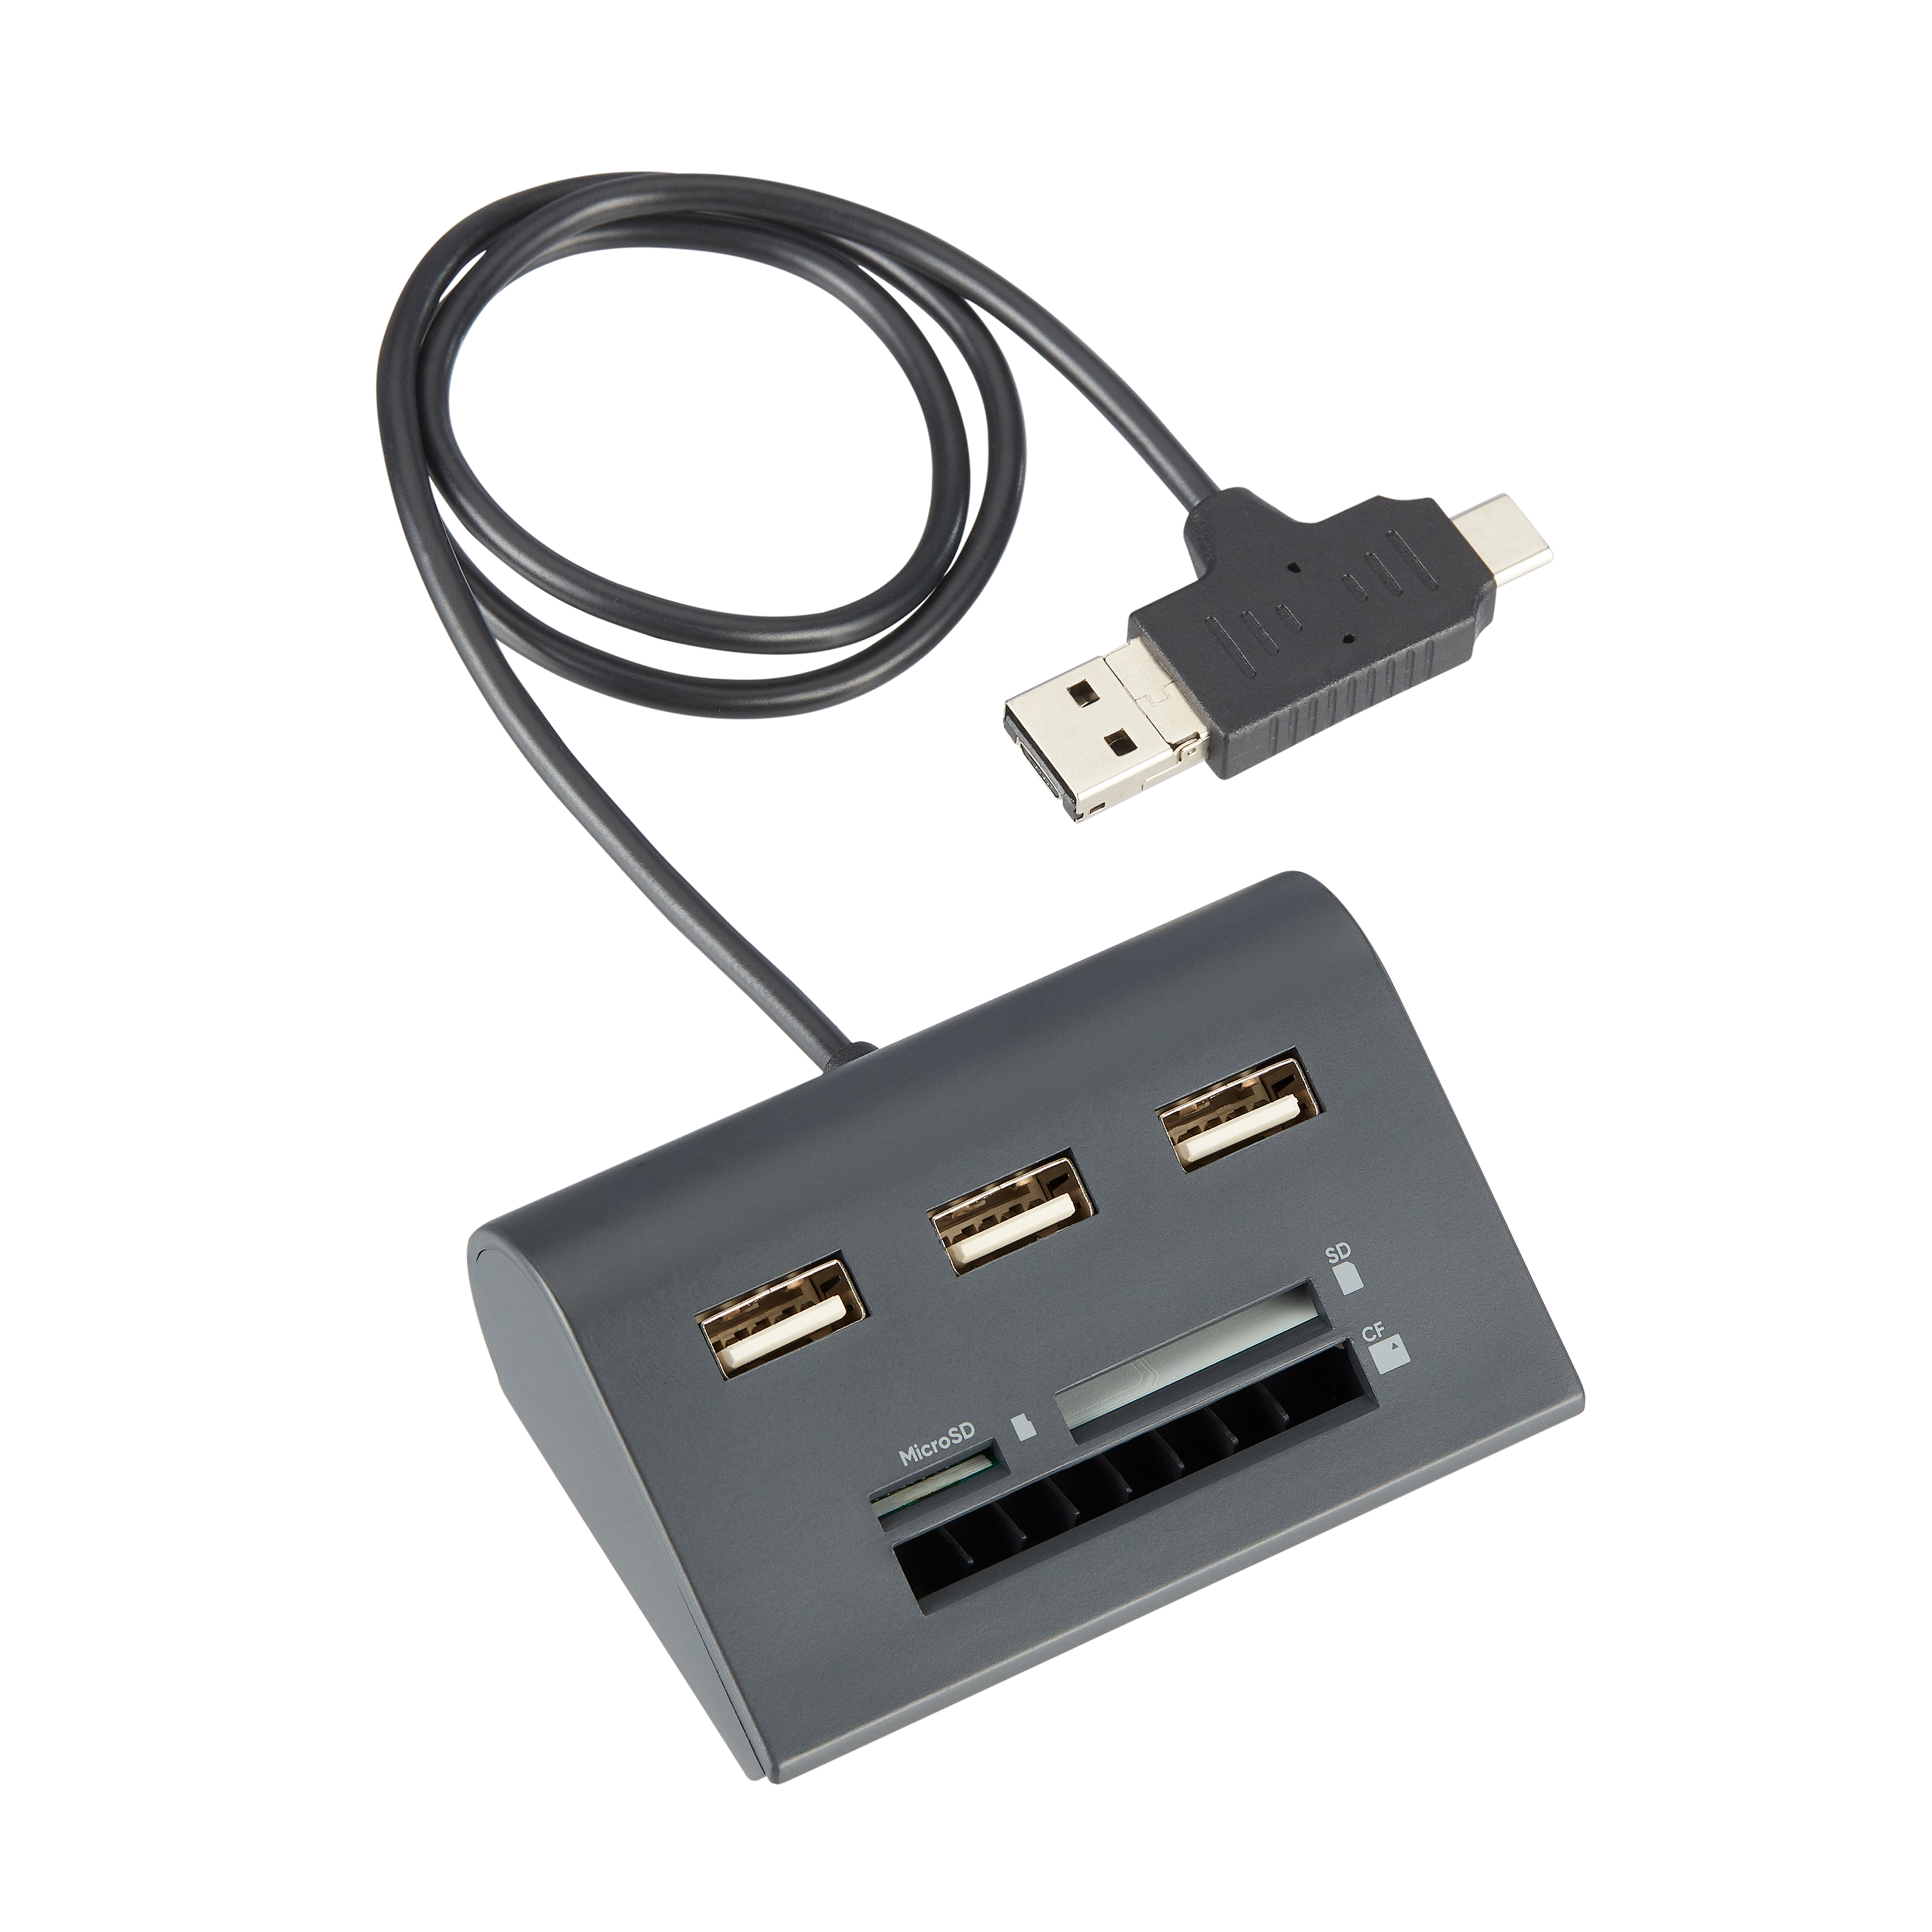 onn. Multi-Port USB Hub with SD, Micro SD and Compact Flash Card Reader - image 4 of 5